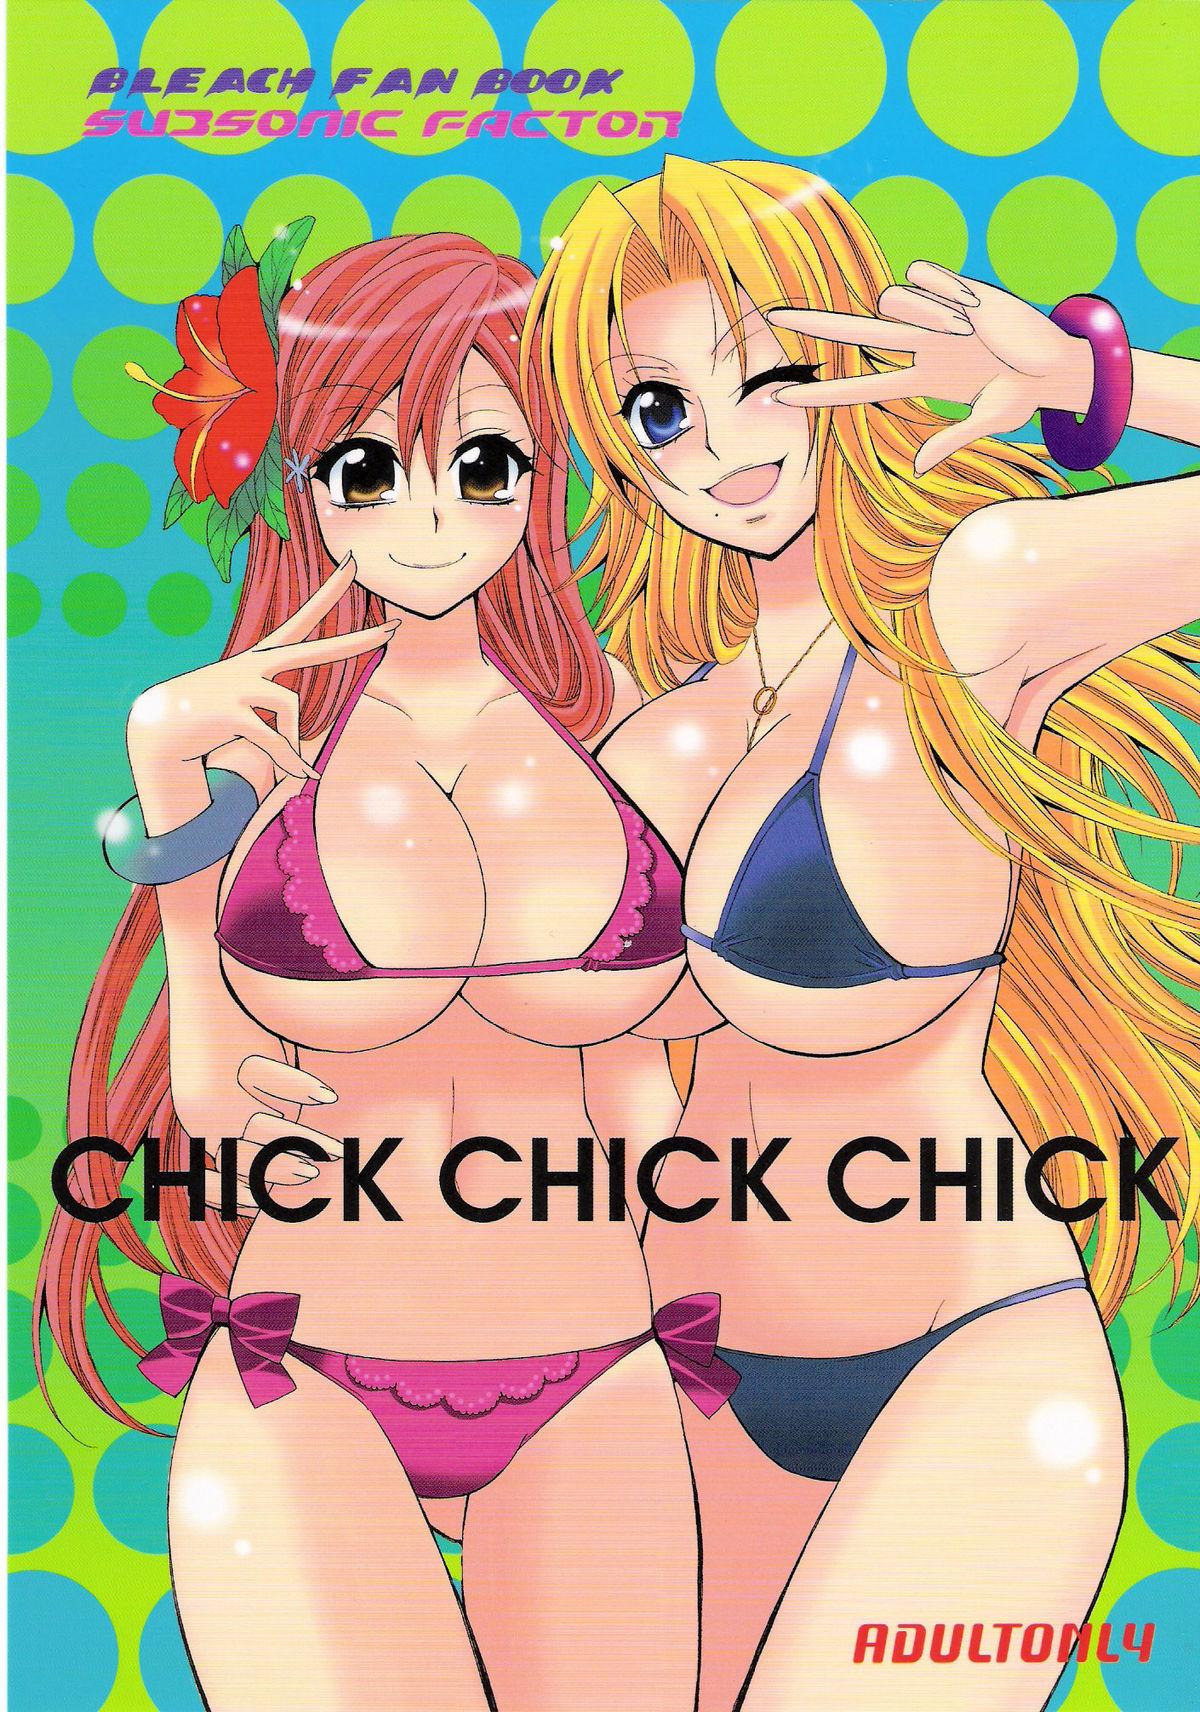 Asstomouth CHICK CHICK CHICK - Bleach Perfect Porn - Page 1